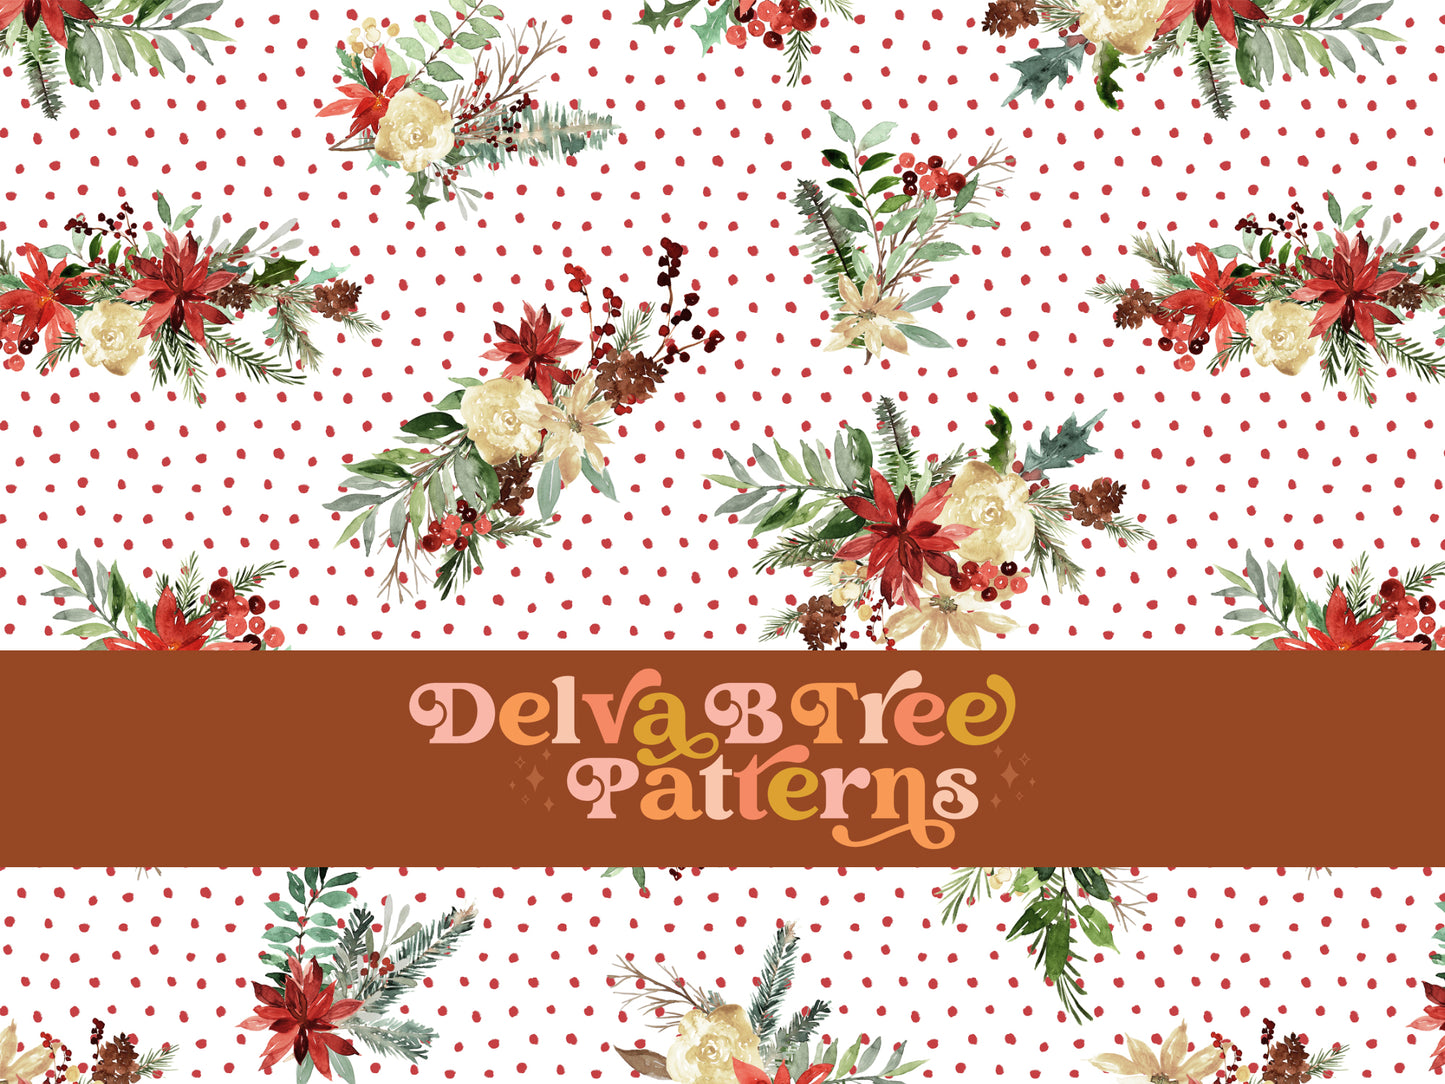 Tossed red watercolor poinsettias, off white flowers, pinecones, holly leaves, mistletoe and winter berries on red polka dots seamless file for fabric printing. Christmas Floral Repeat Pattern for textiles, polymailers, baby boy lovey blankets, nursery crib bedding, kids clothing, girls hair accessories, home decor accents, pet products.